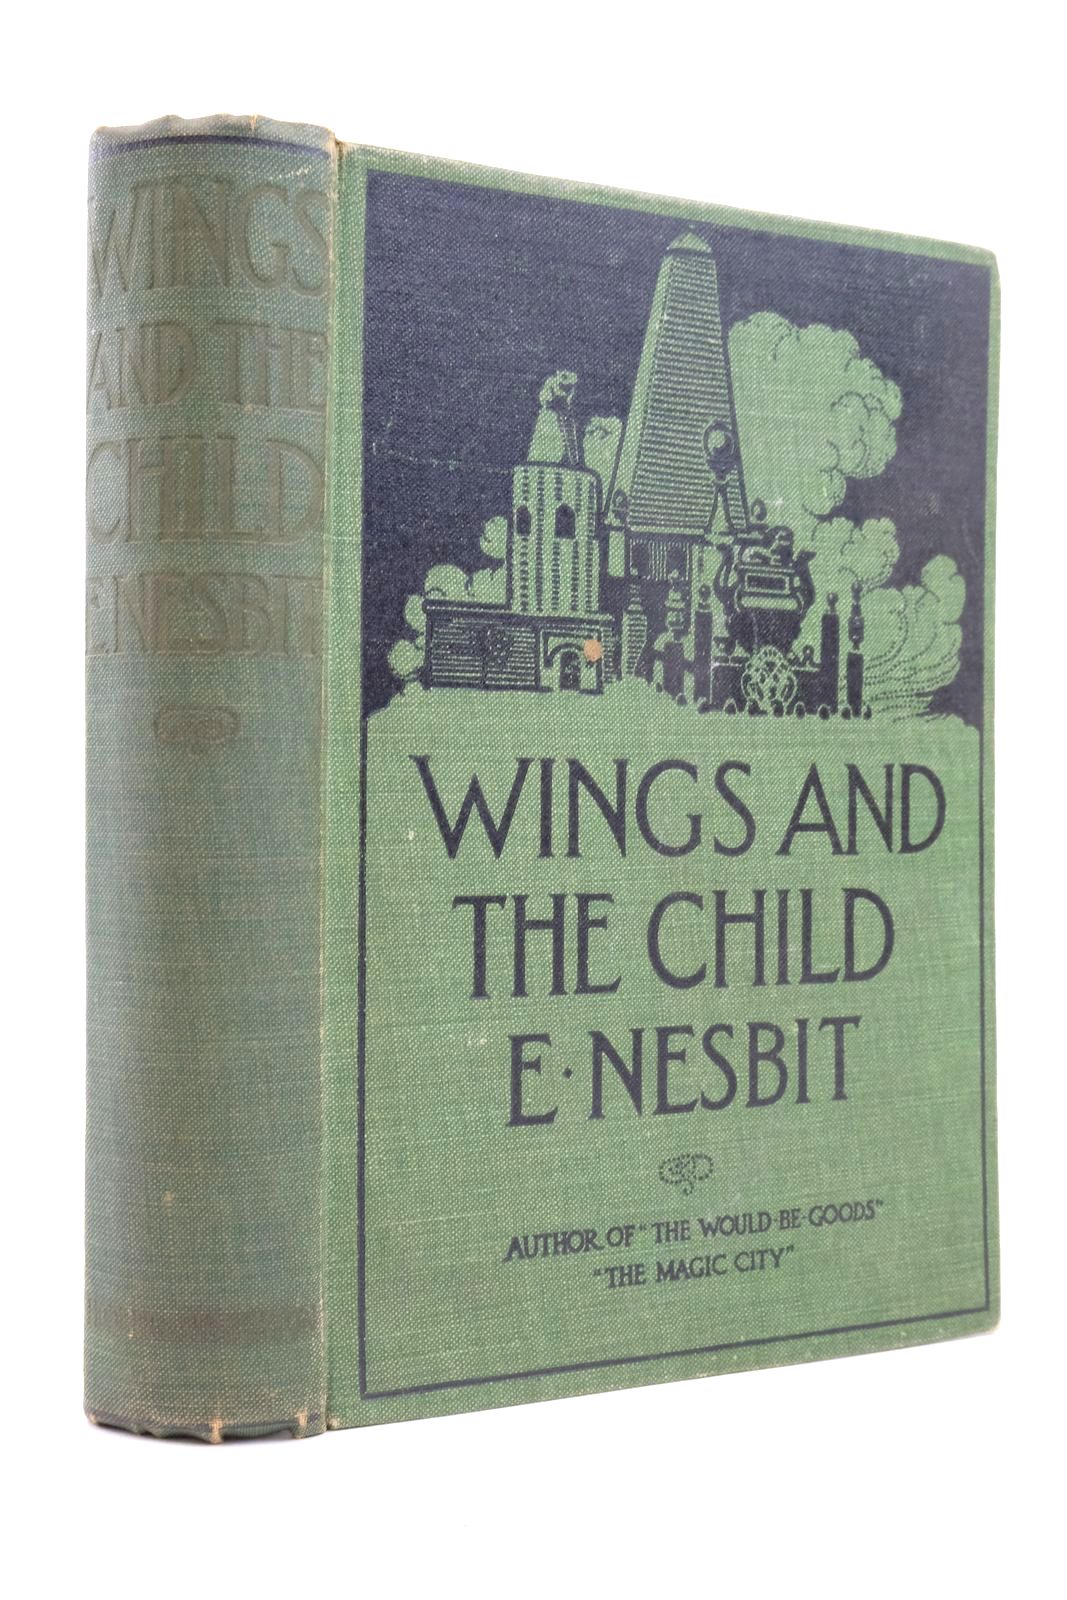 Photo of WINGS AND THE CHILD written by Nesbit, E. illustrated by Barraud, George published by Hodder &amp; Stoughton (STOCK CODE: 2138090)  for sale by Stella & Rose's Books